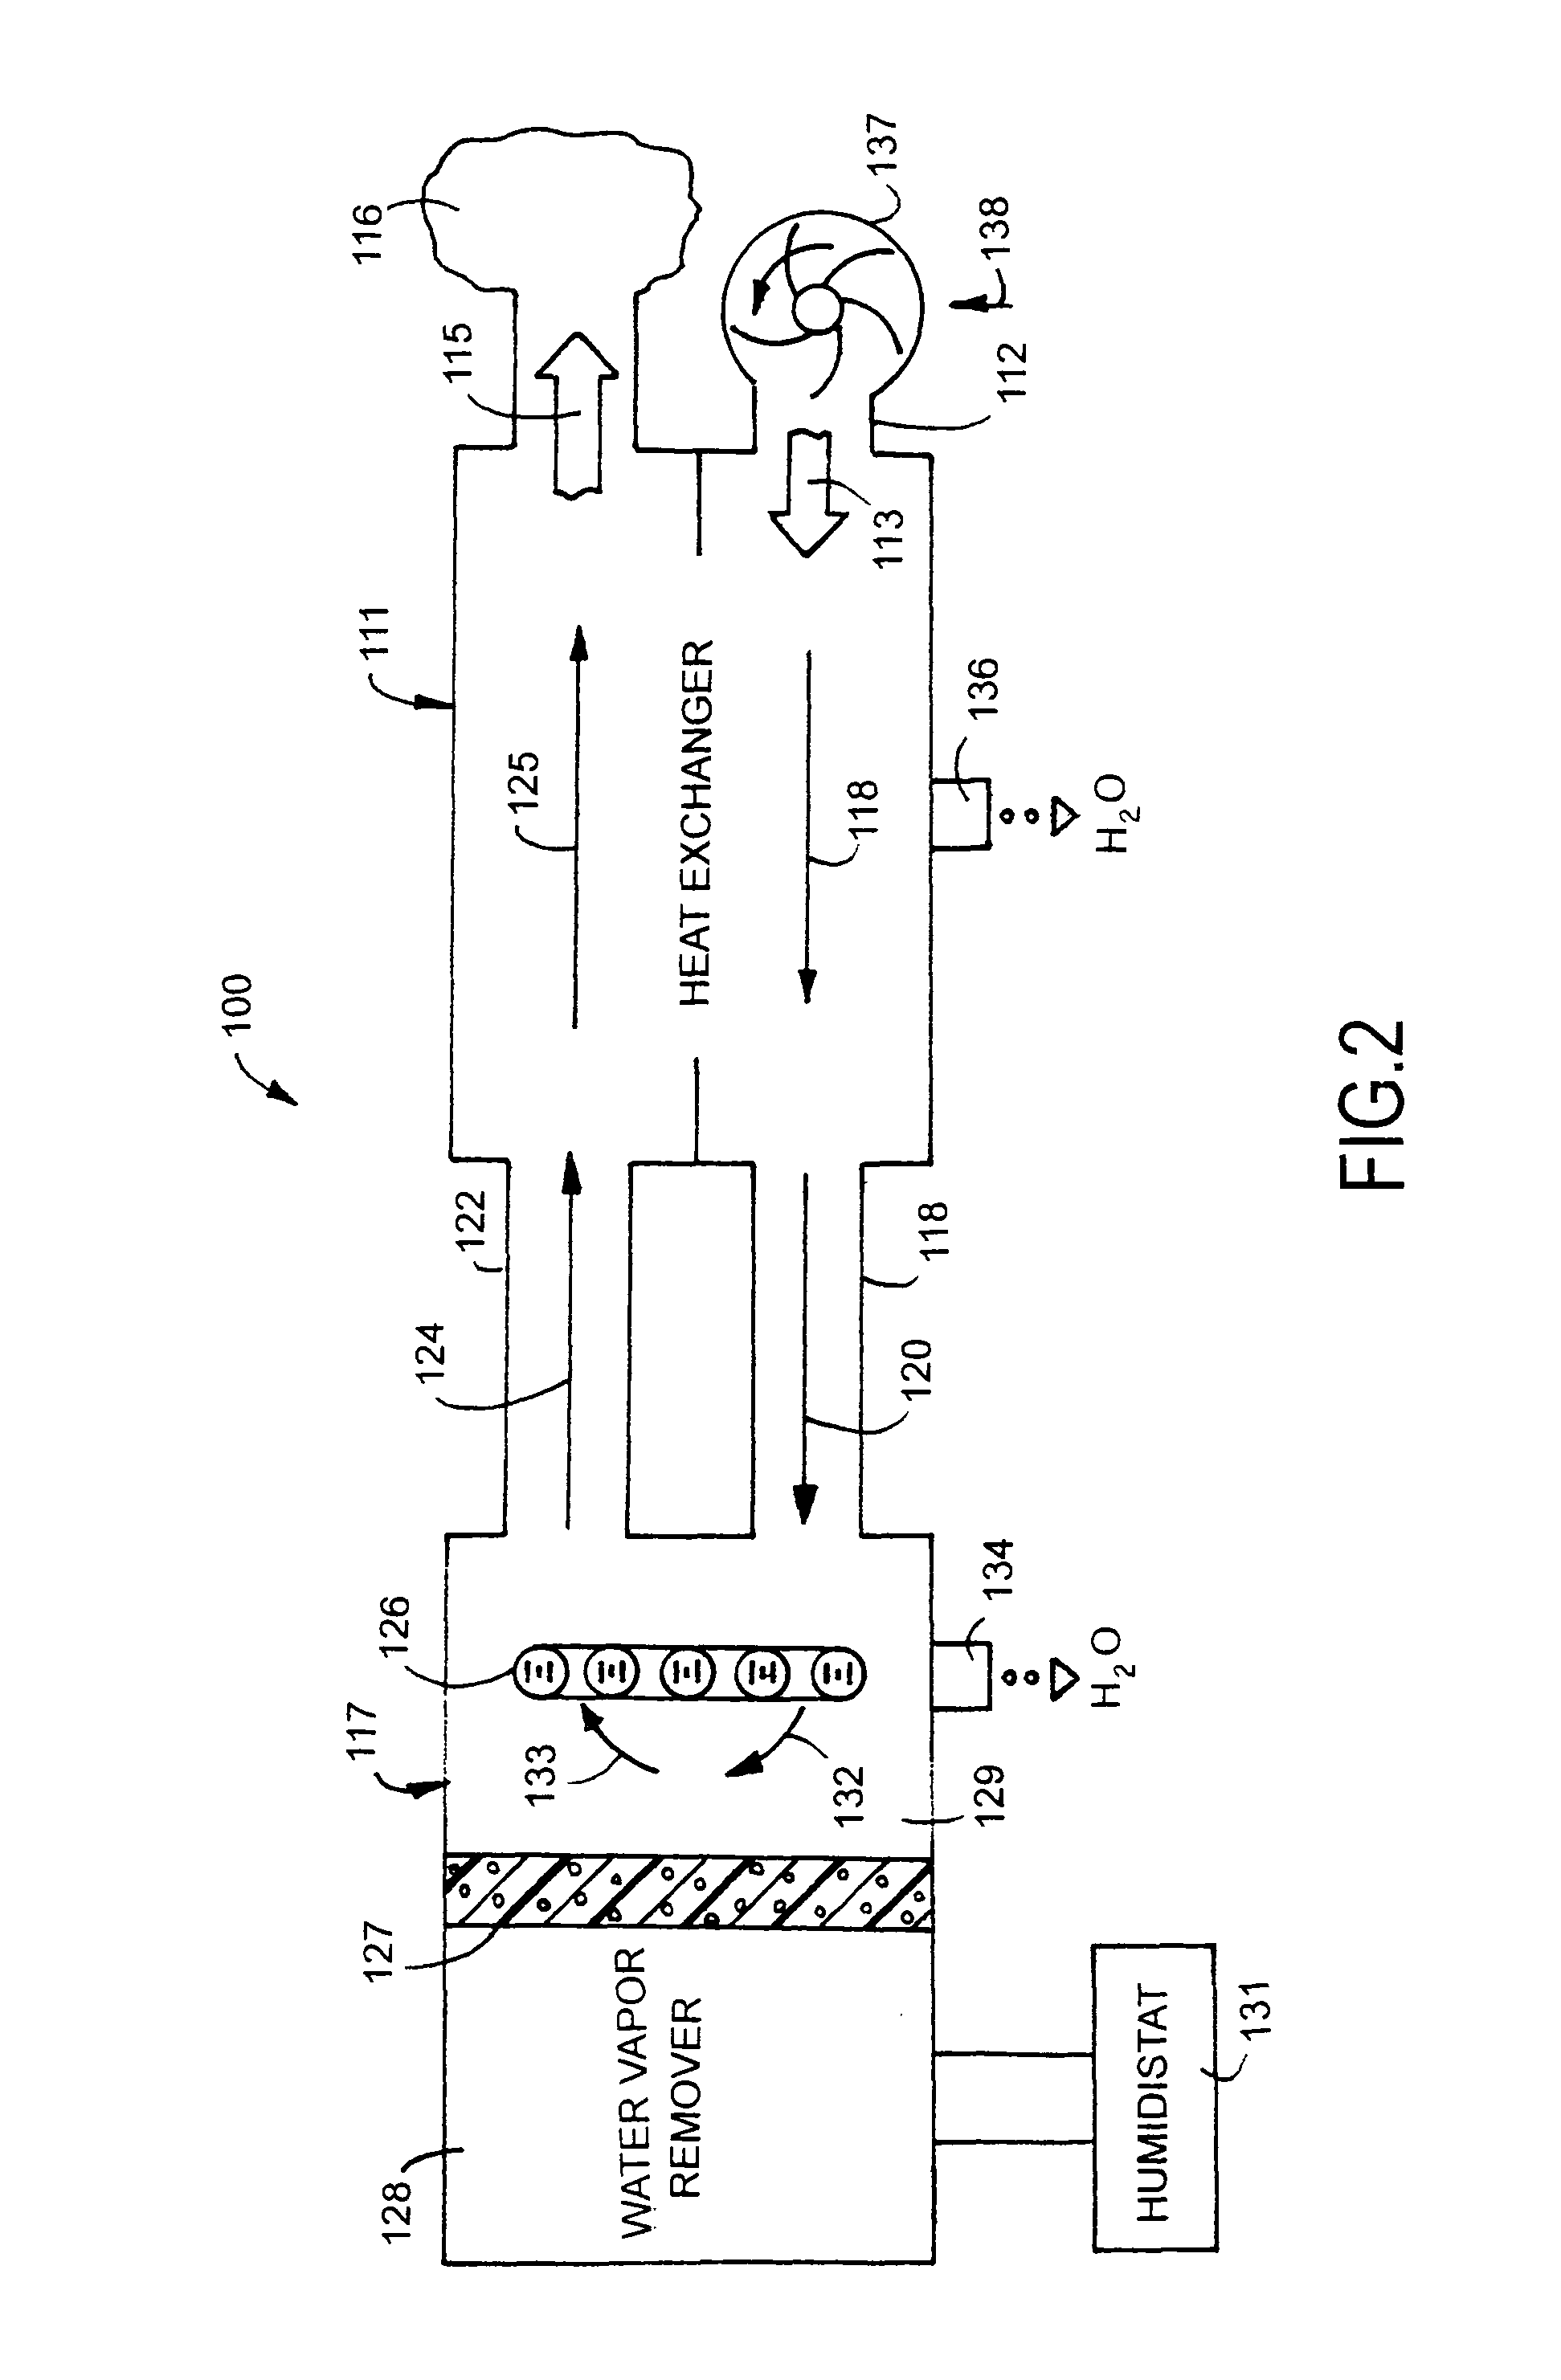 Temperature and humidity air treatment system